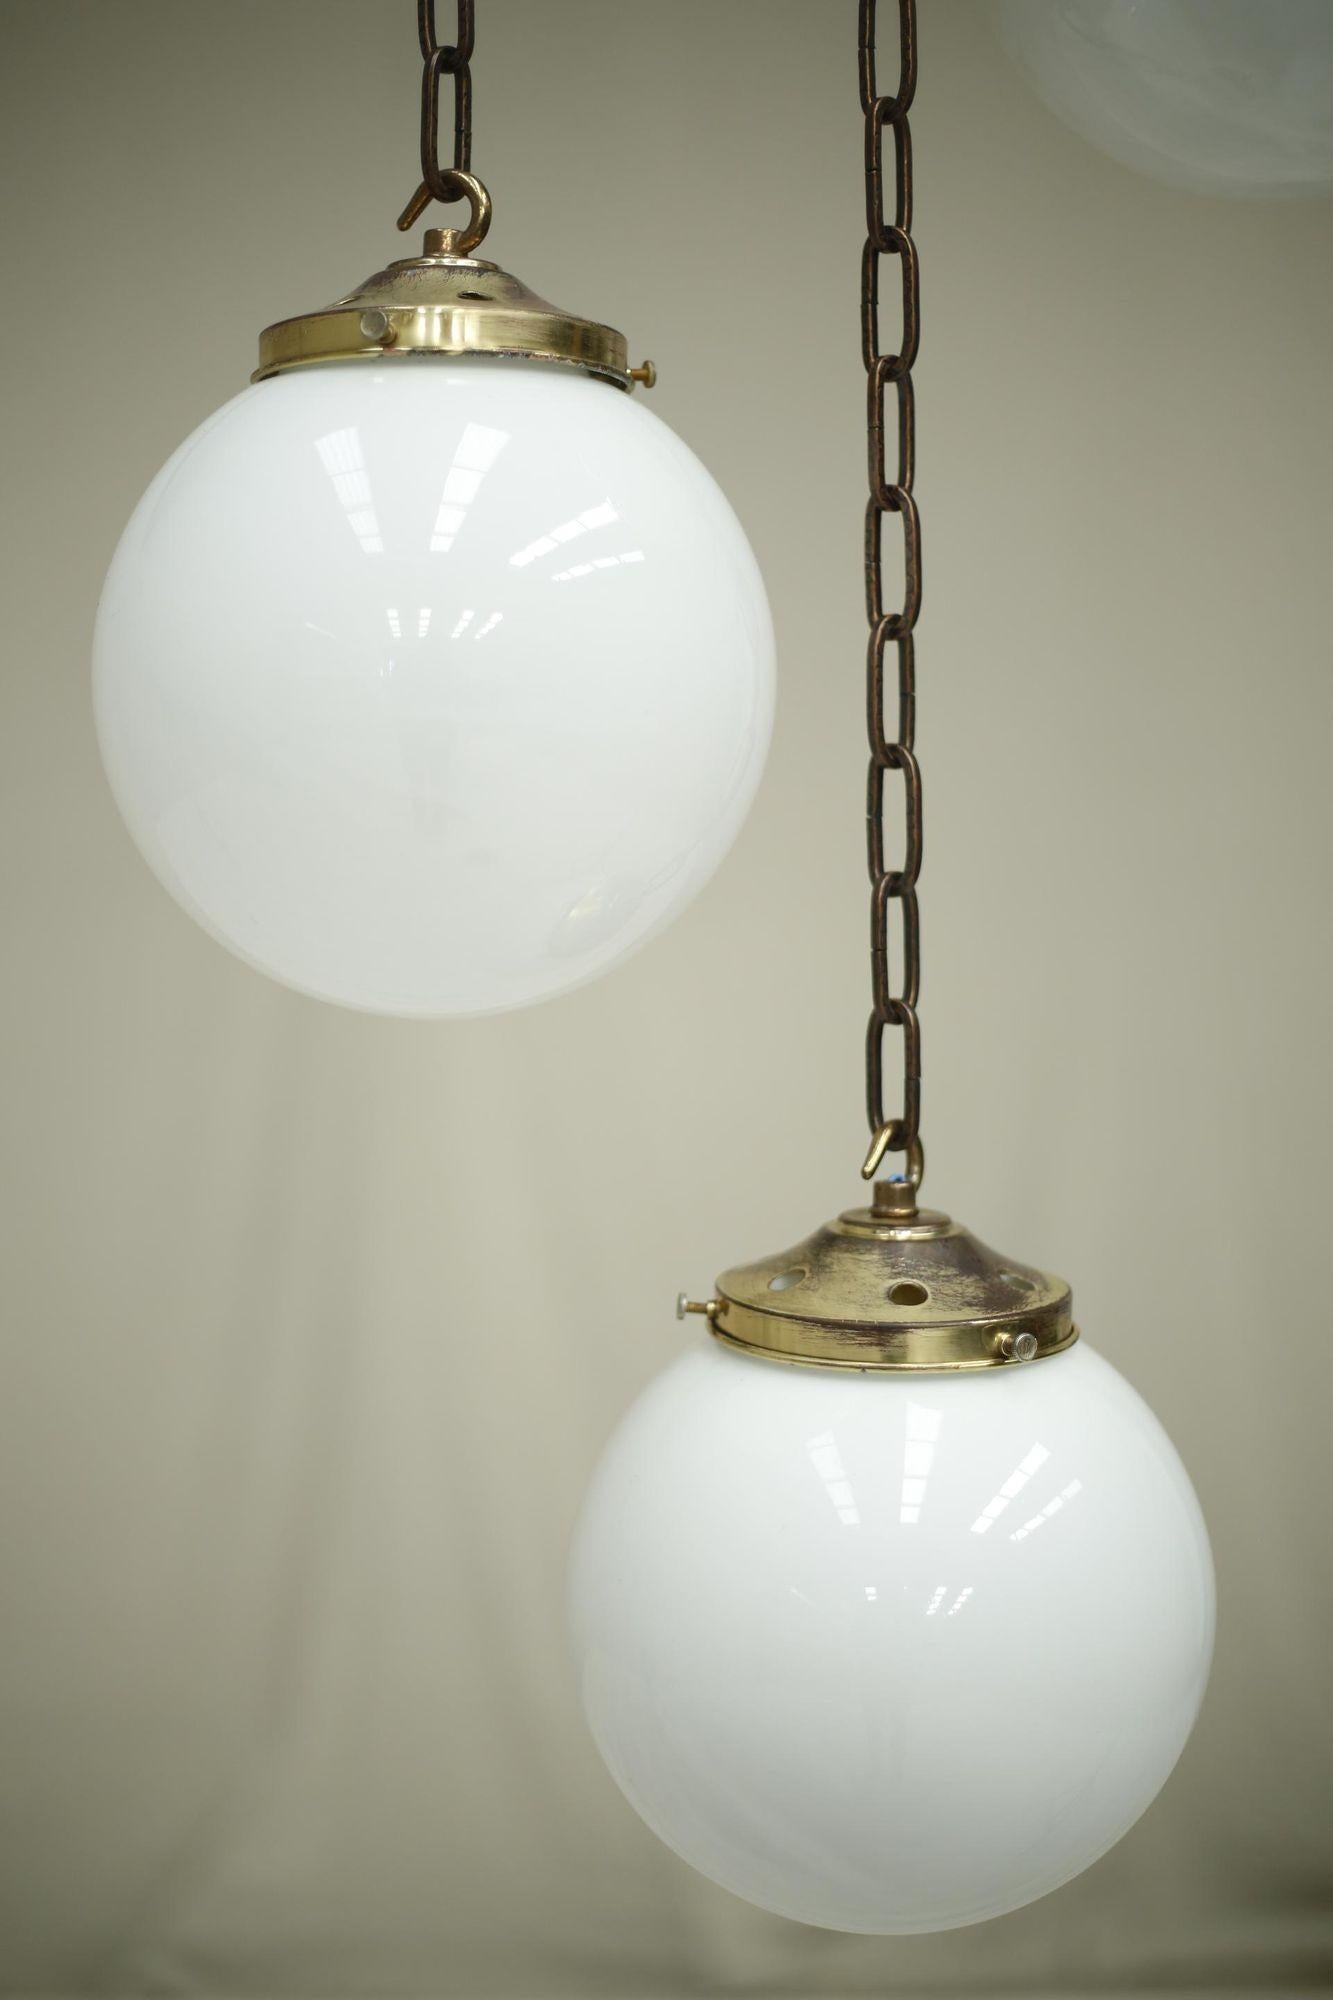 These are very attractive 20th century opaline globe lights. They are a wonderful smaller than average size giving them the ability to be used in a number of different ways. Either in a run over a kitchen island or in a bunch hanging as a